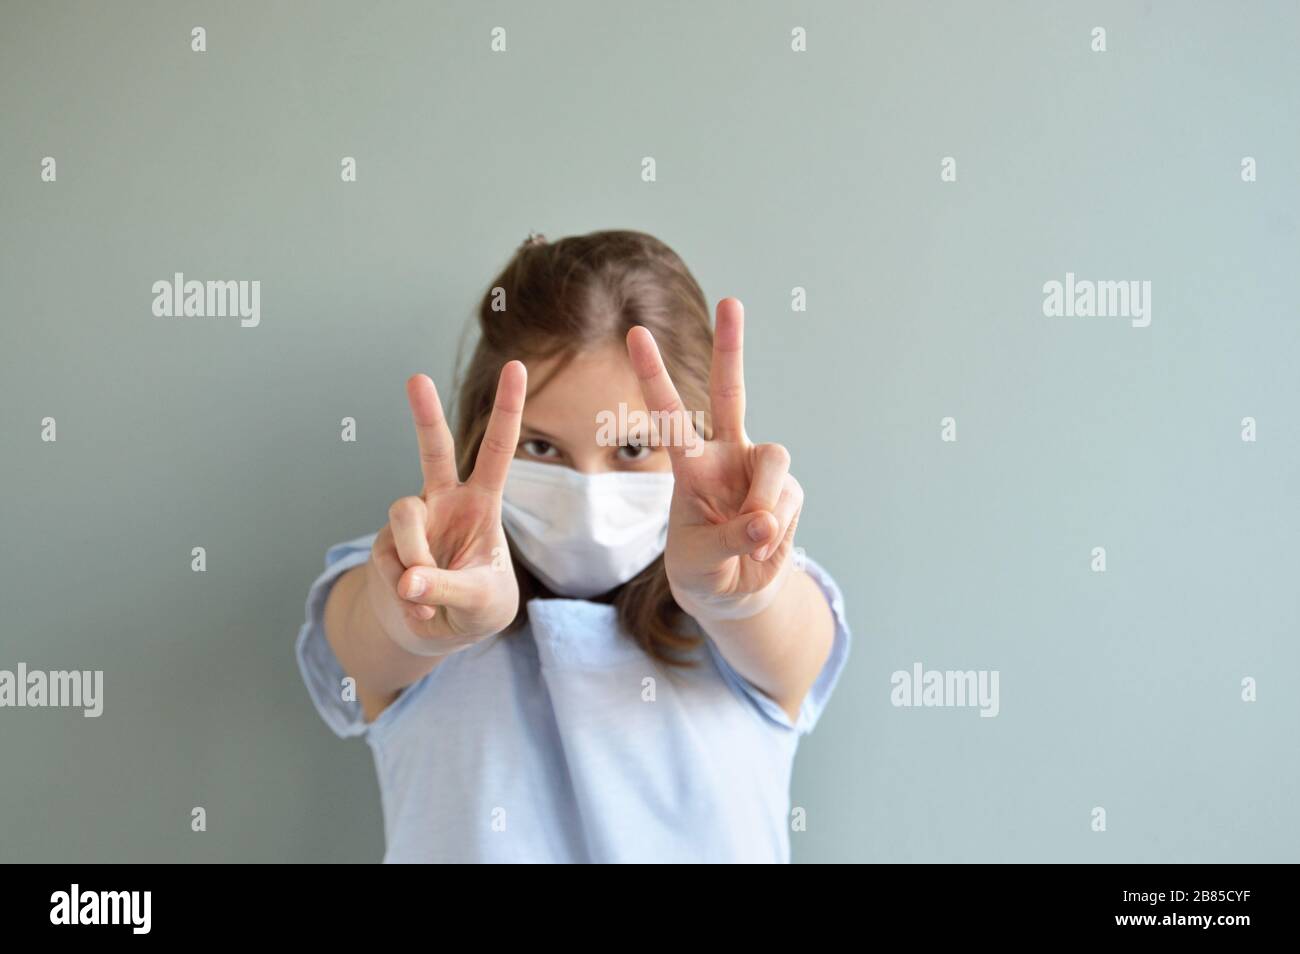 Victory sign shown by girl wearing surgical mask Stock Photo